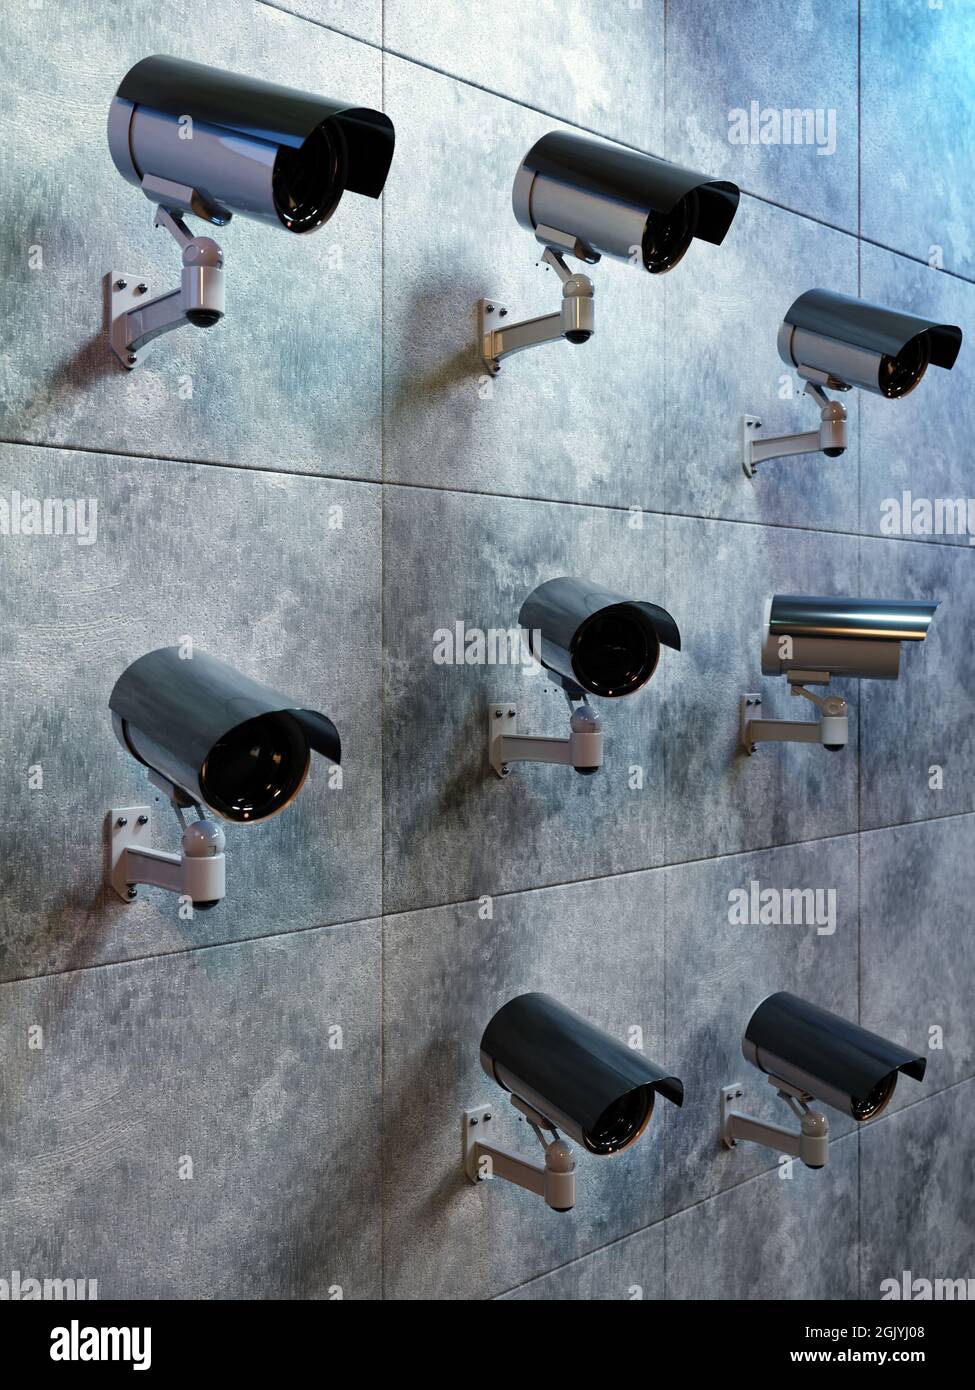 3D rendering many security cameras mounted to the wall monitoring the area Stock Photo